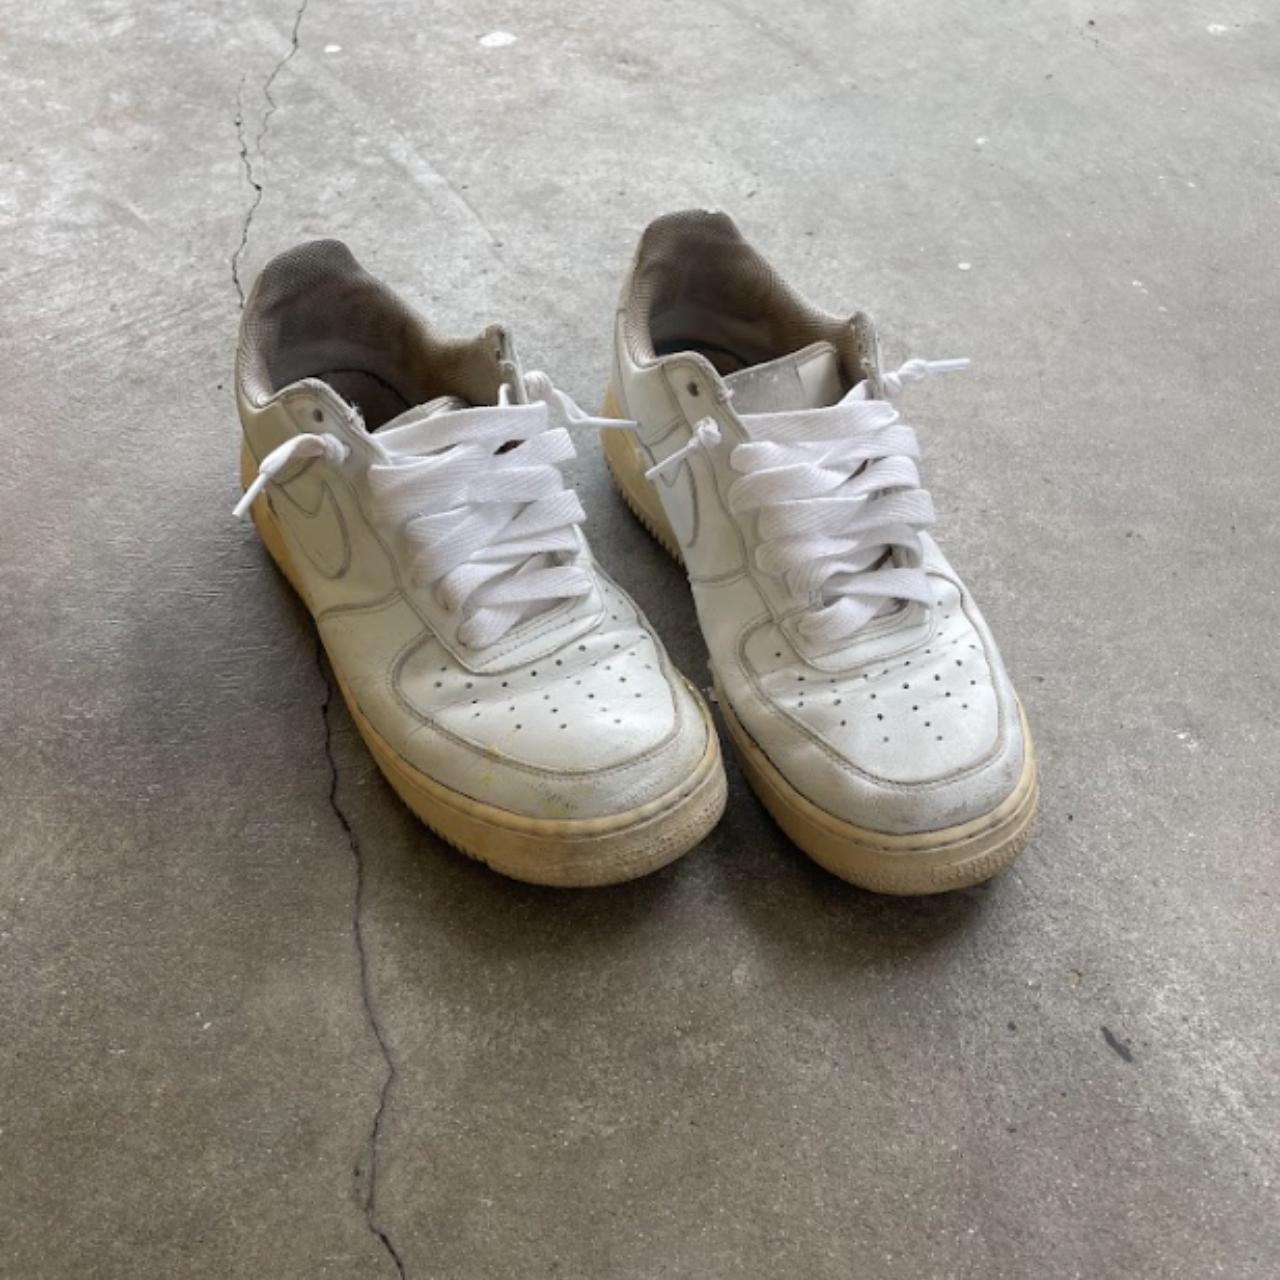 00s Air forces, yellowing sole with cracks. Cleaned... - Depop